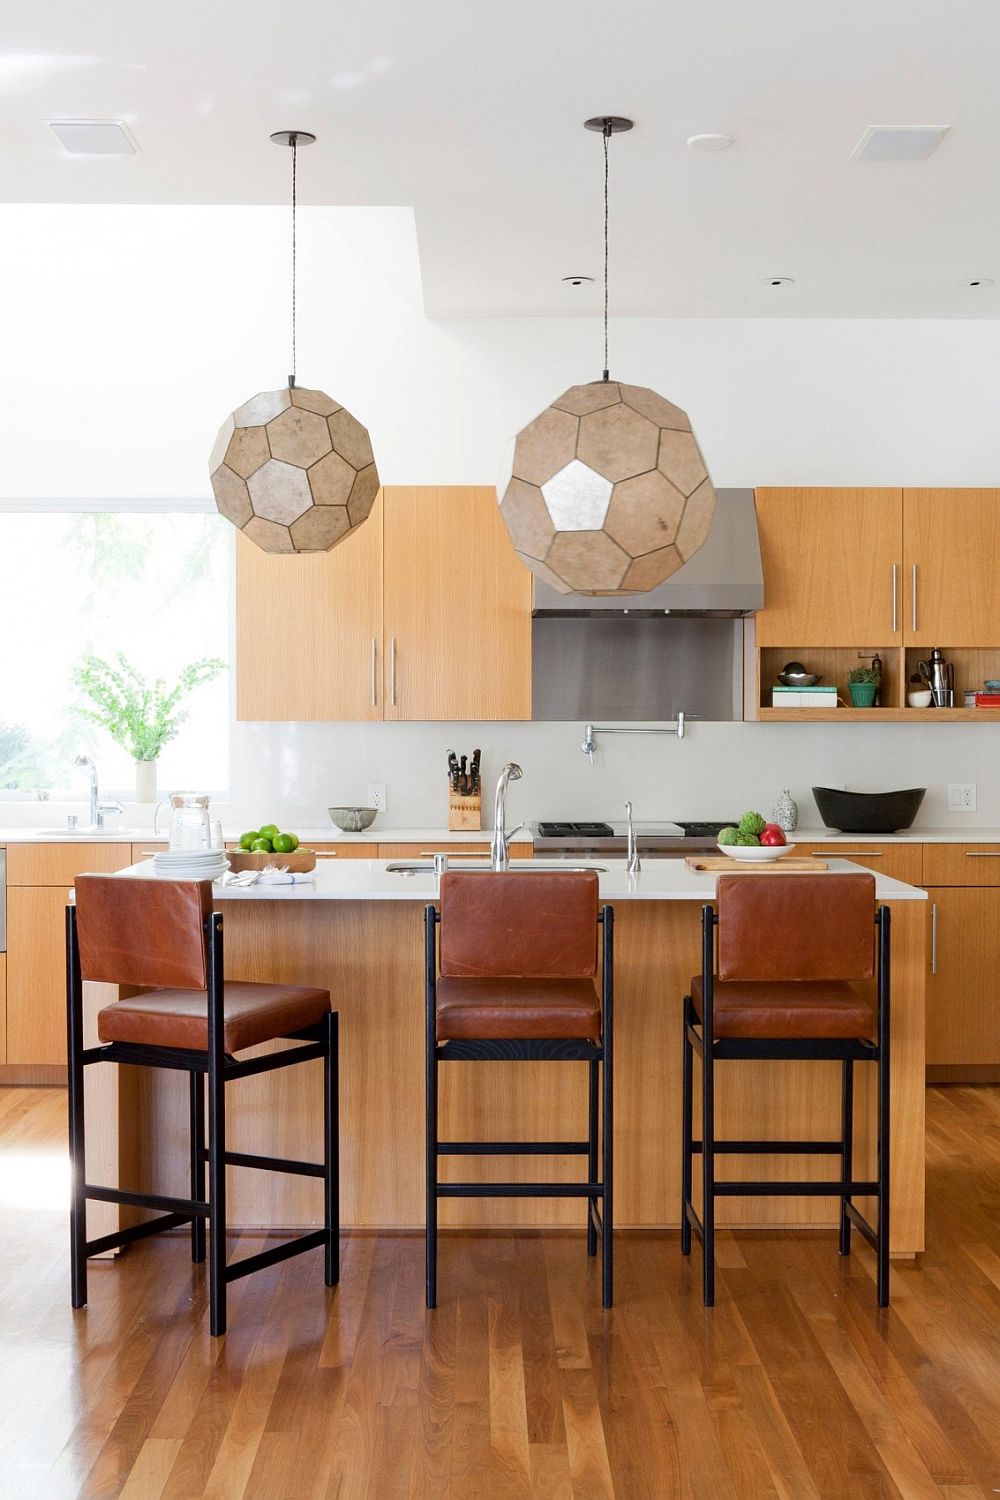 Pendant lights with hexagonal pattern for the modern kitchen